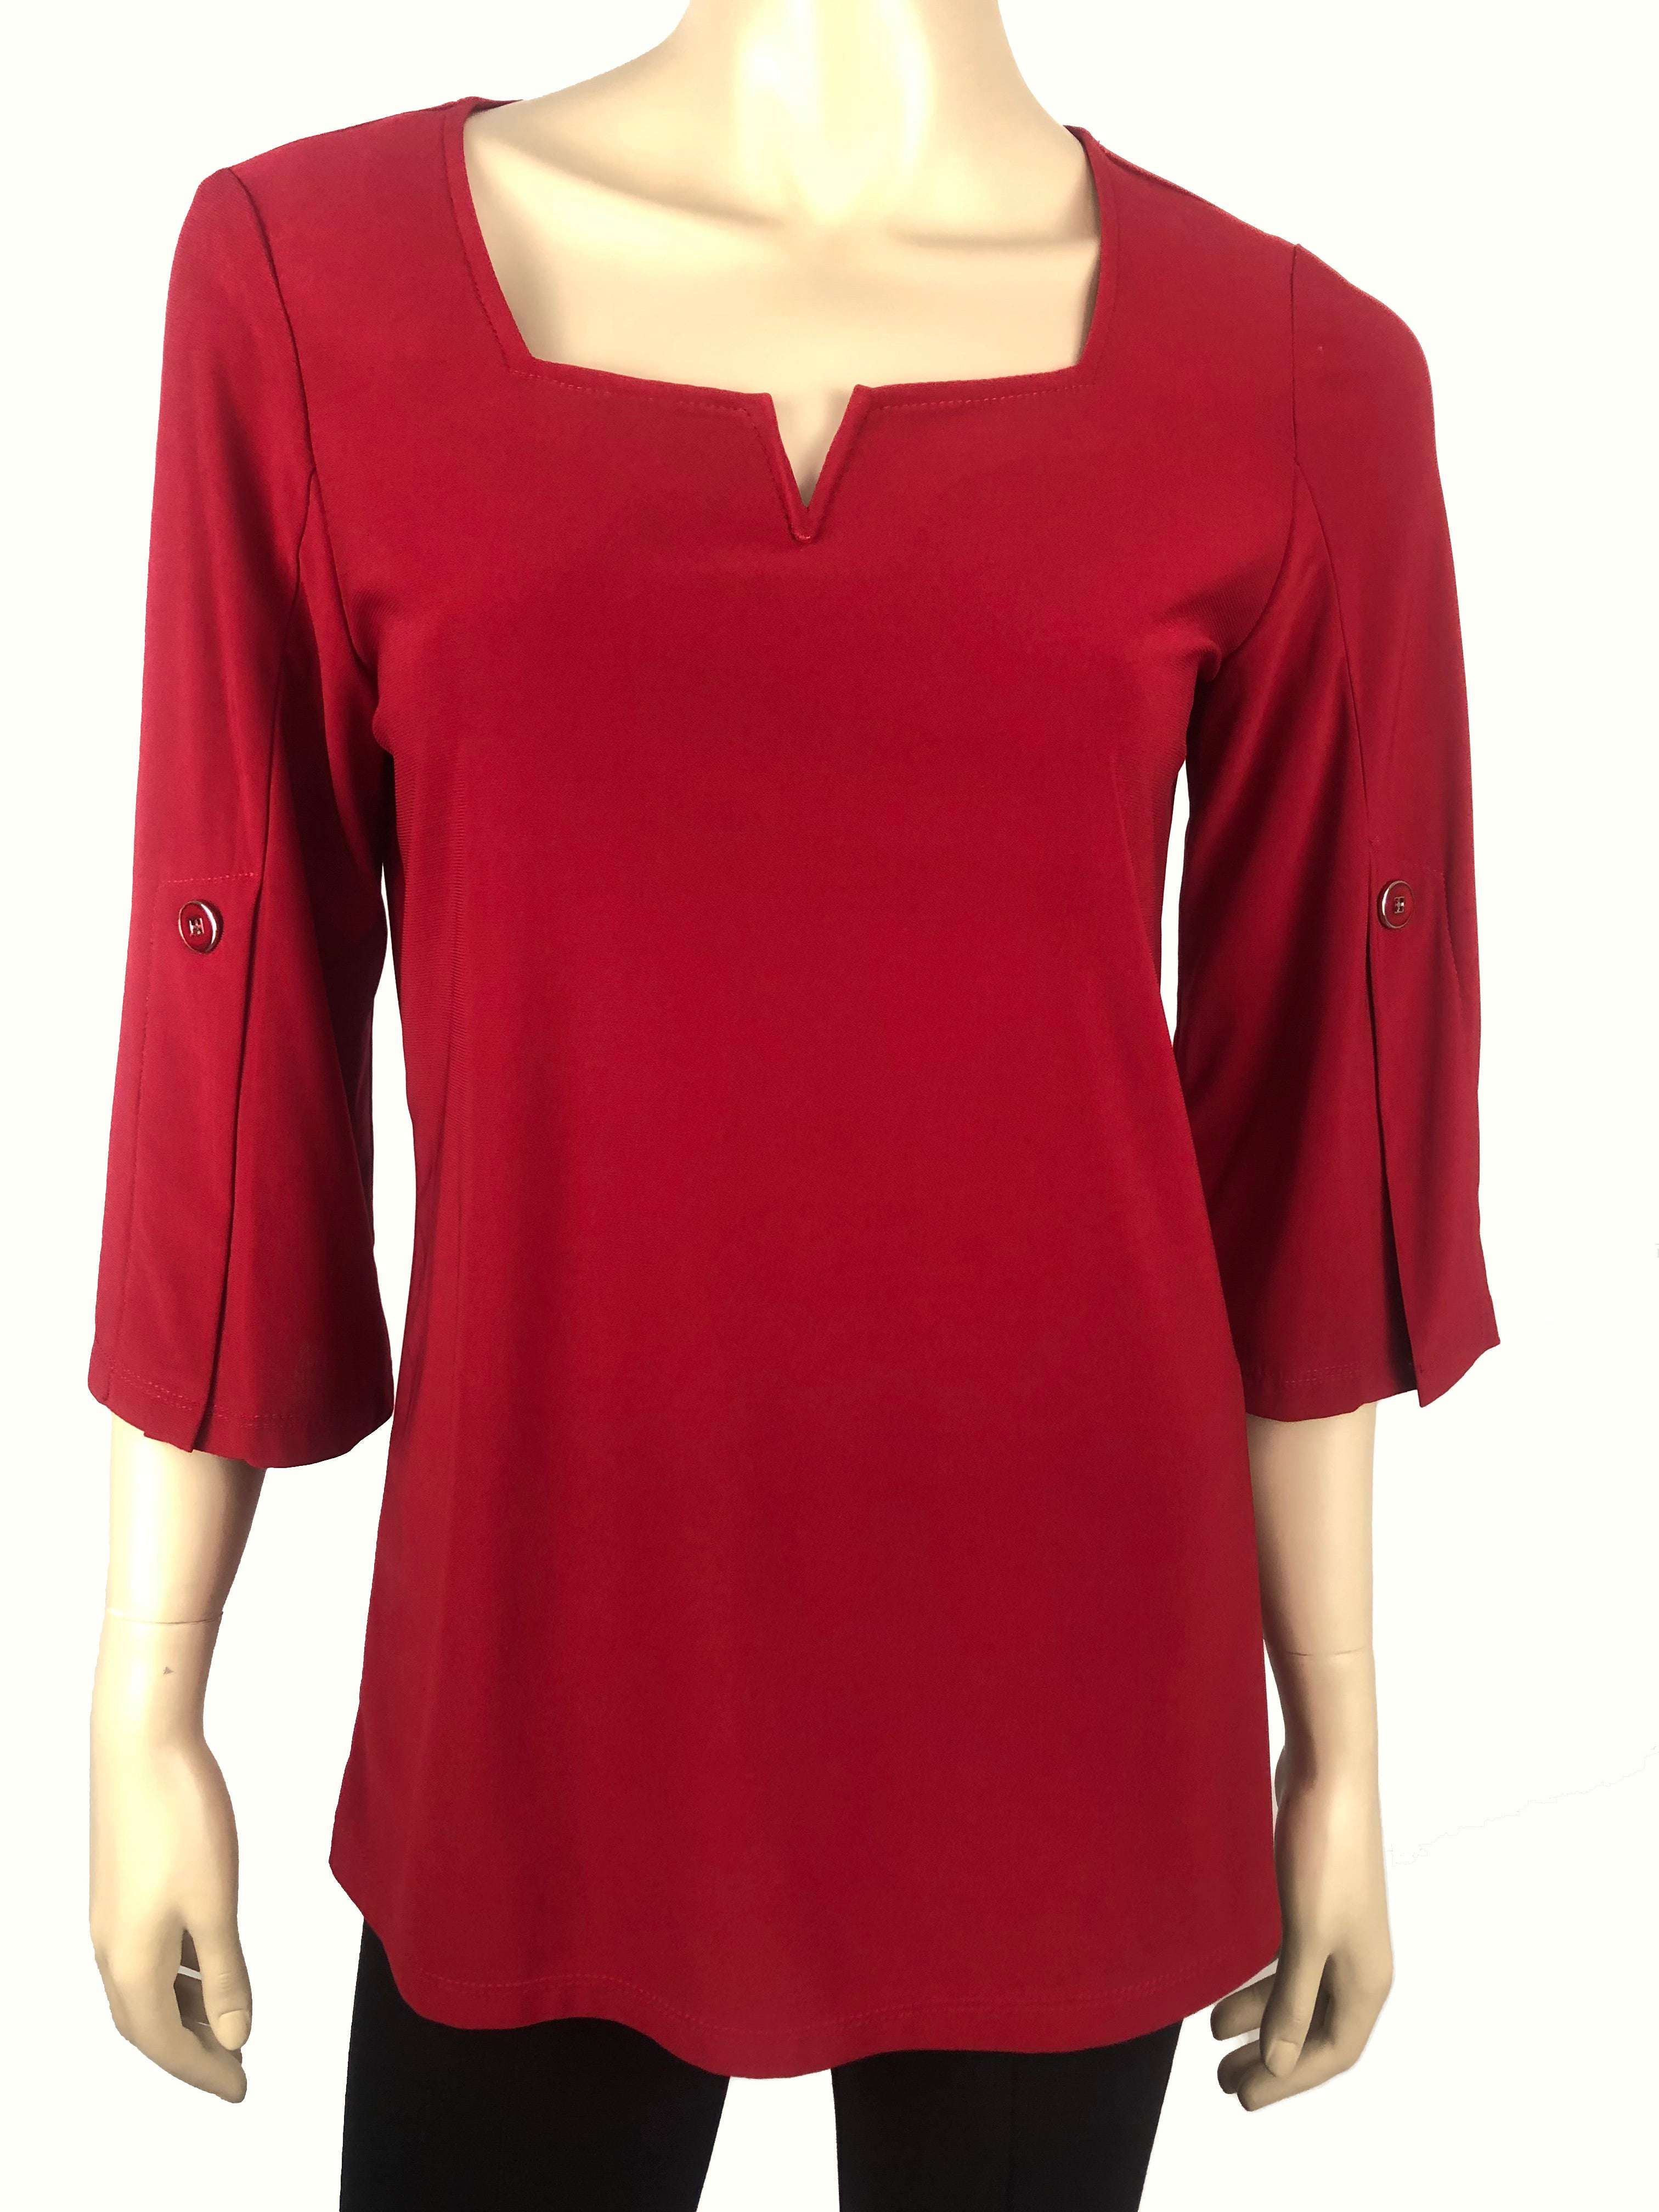 Women's Red Top Stunning Neckline with Sleeve Detail Quality fabric Made in Canada - Yvonne Marie - Yvonne Marie